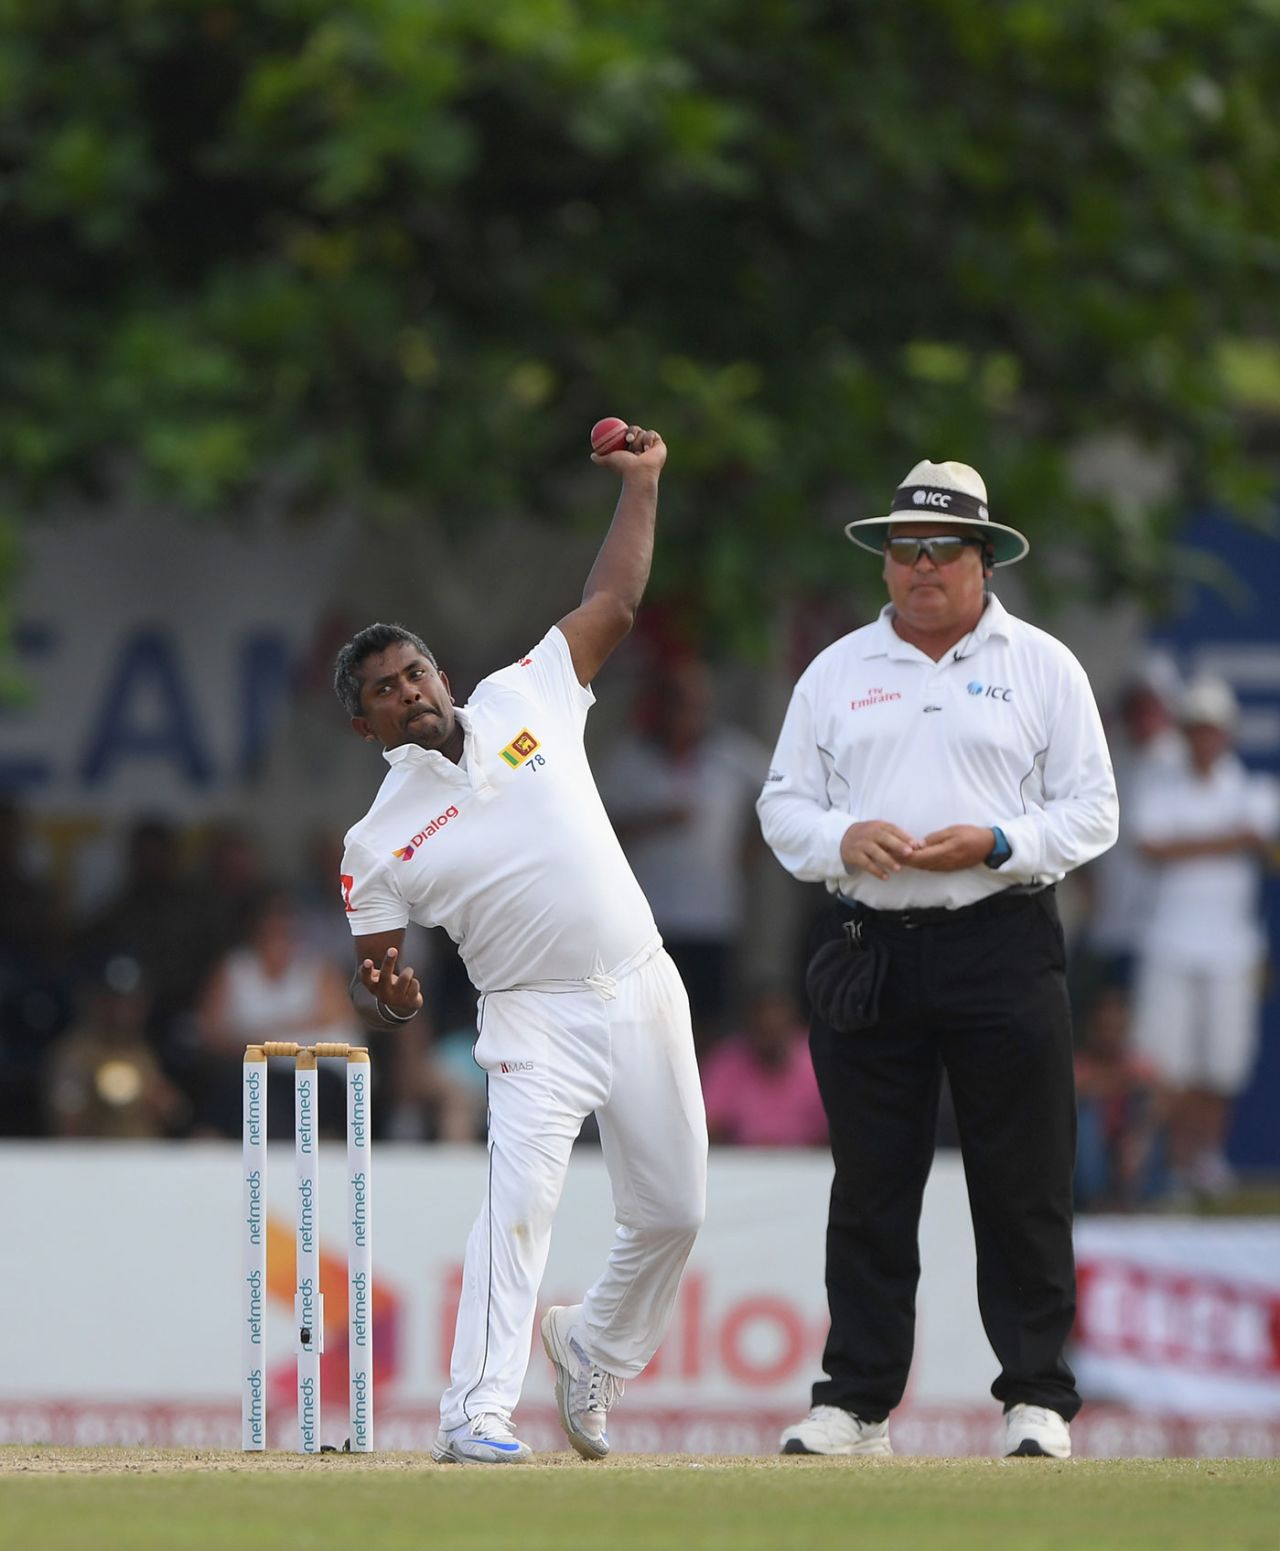 Rangana Herath bowls for the final time in Test cricket, Sri Lanka v England, 1st Test, 3rd day, Galle, November 8, 2018